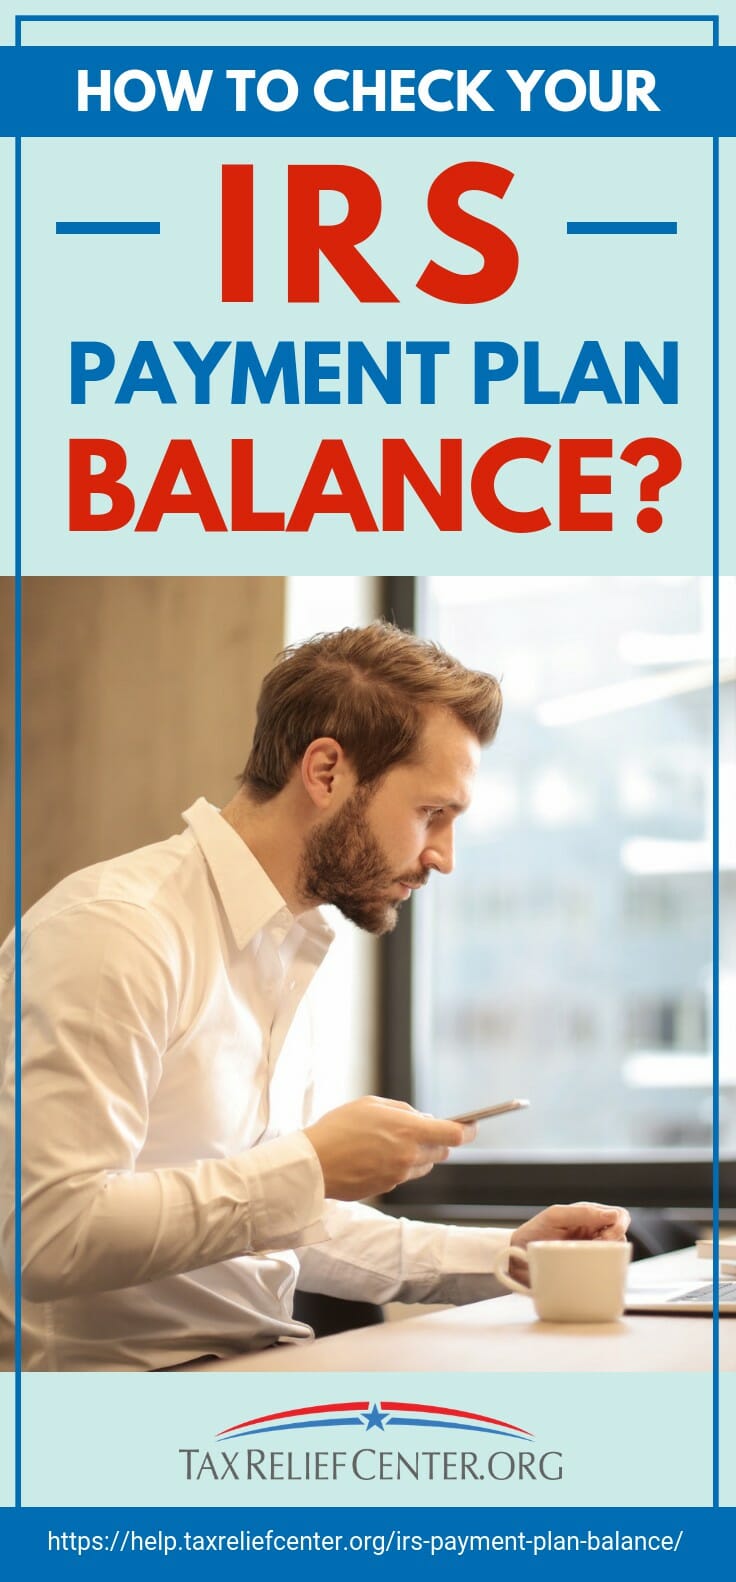 How To Check Your IRS Payment Plan Balance | Tax Relief Center | https://help.taxreliefcenter.org/irs-payment-plan-balance/